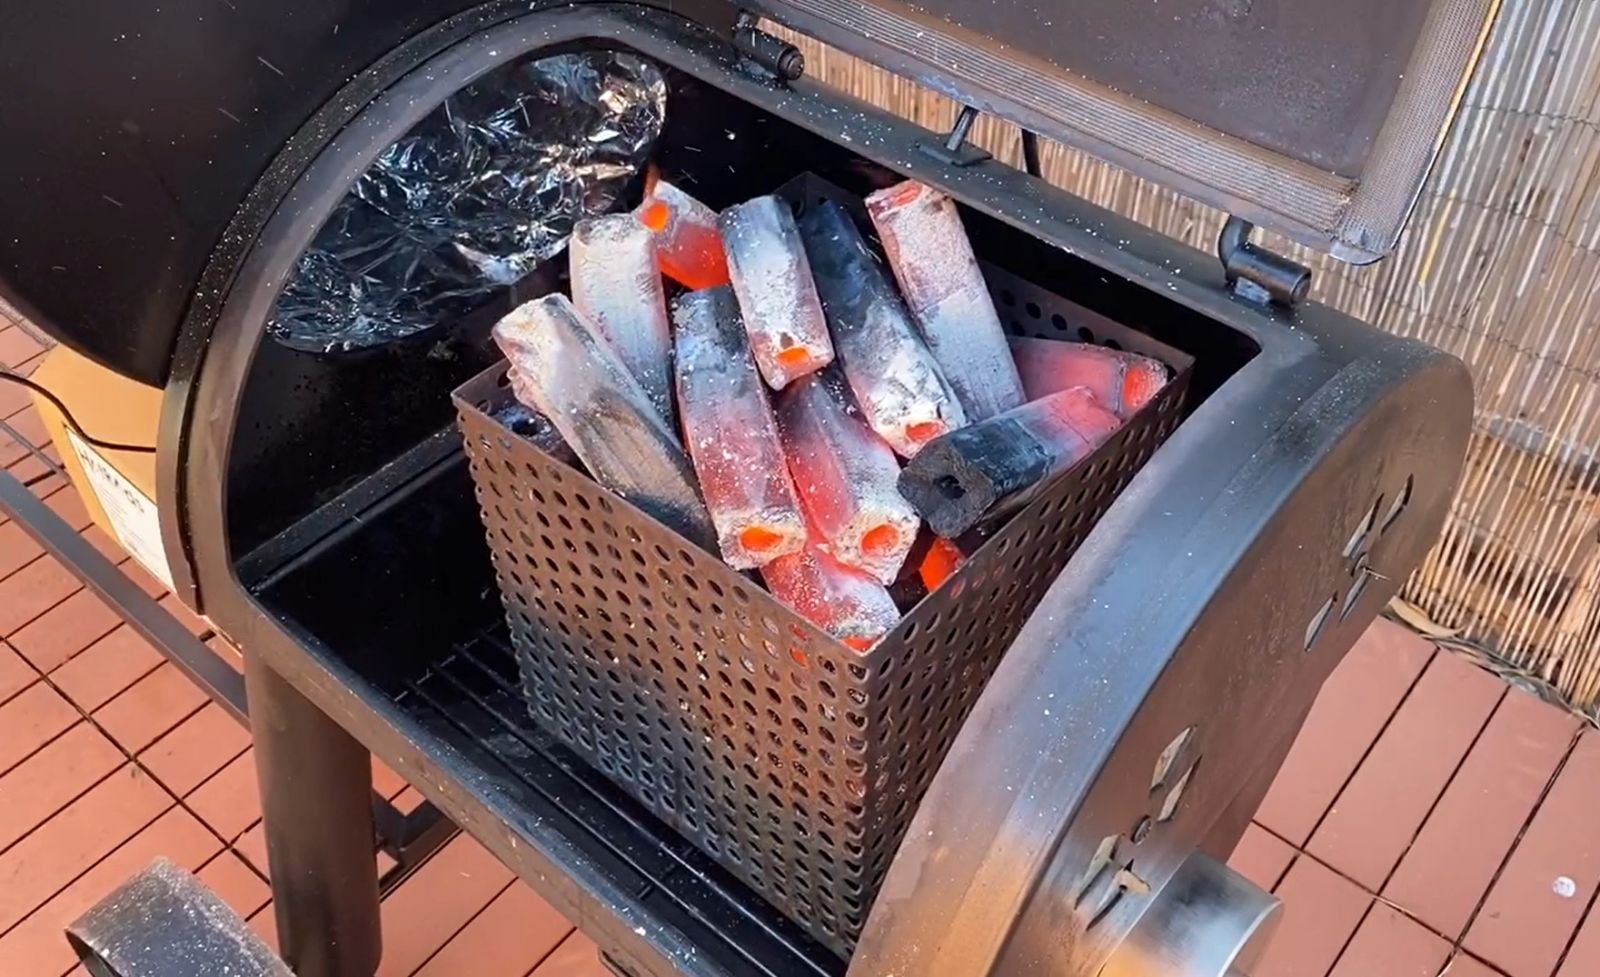 This image shows Japanese Grade charcoal briquettes being used in an offset smoker. The briquettes were placed in a Charcoal Basket